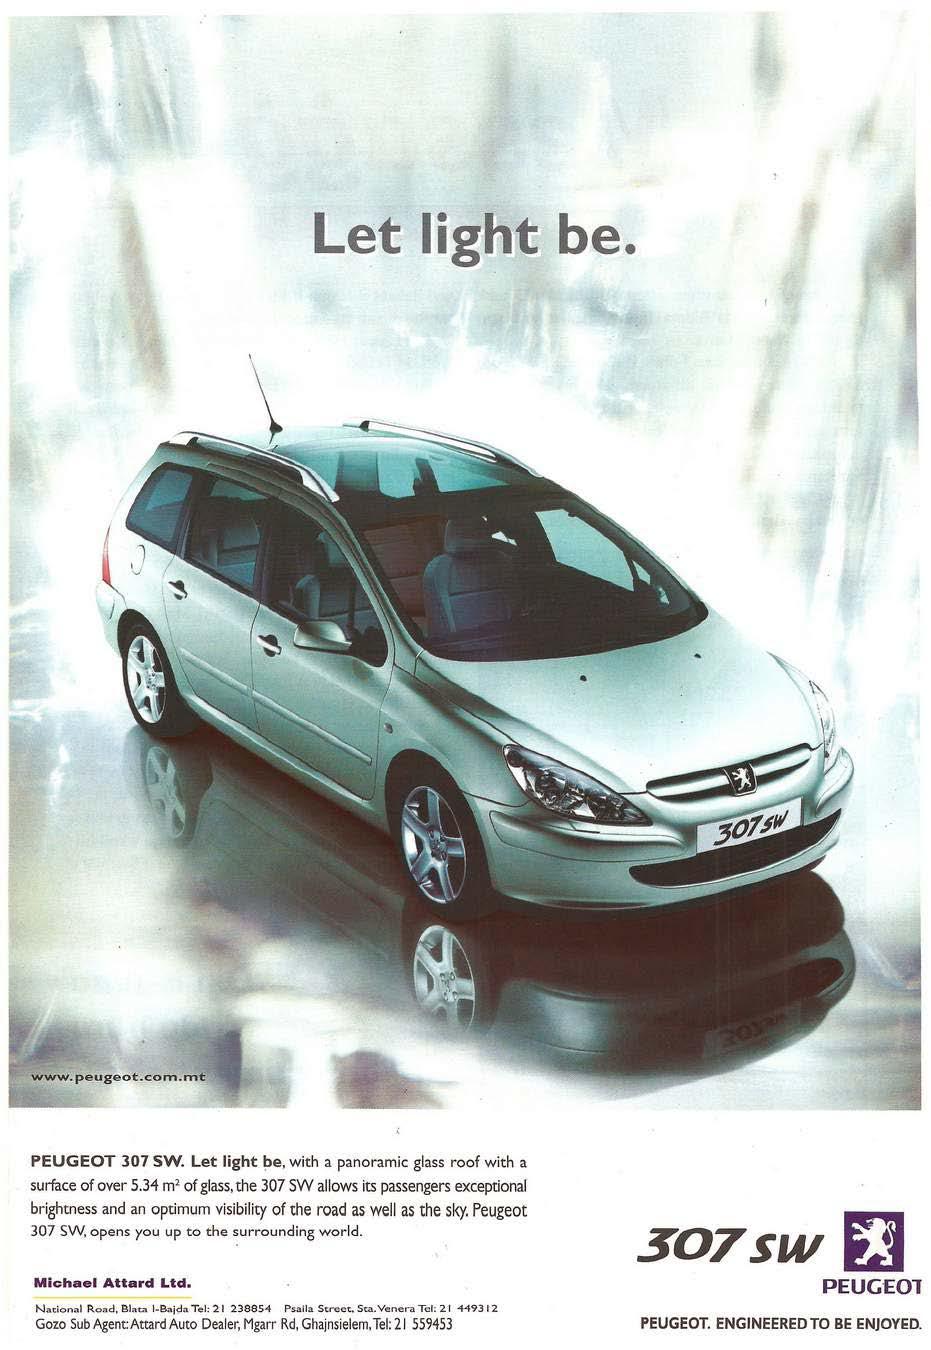 Let ligfrlf be... wwvi. peugeot.com.mt PEUGEOT 307 SW. Let light!>e. with a panoramic glass roof with a surface of over 5.